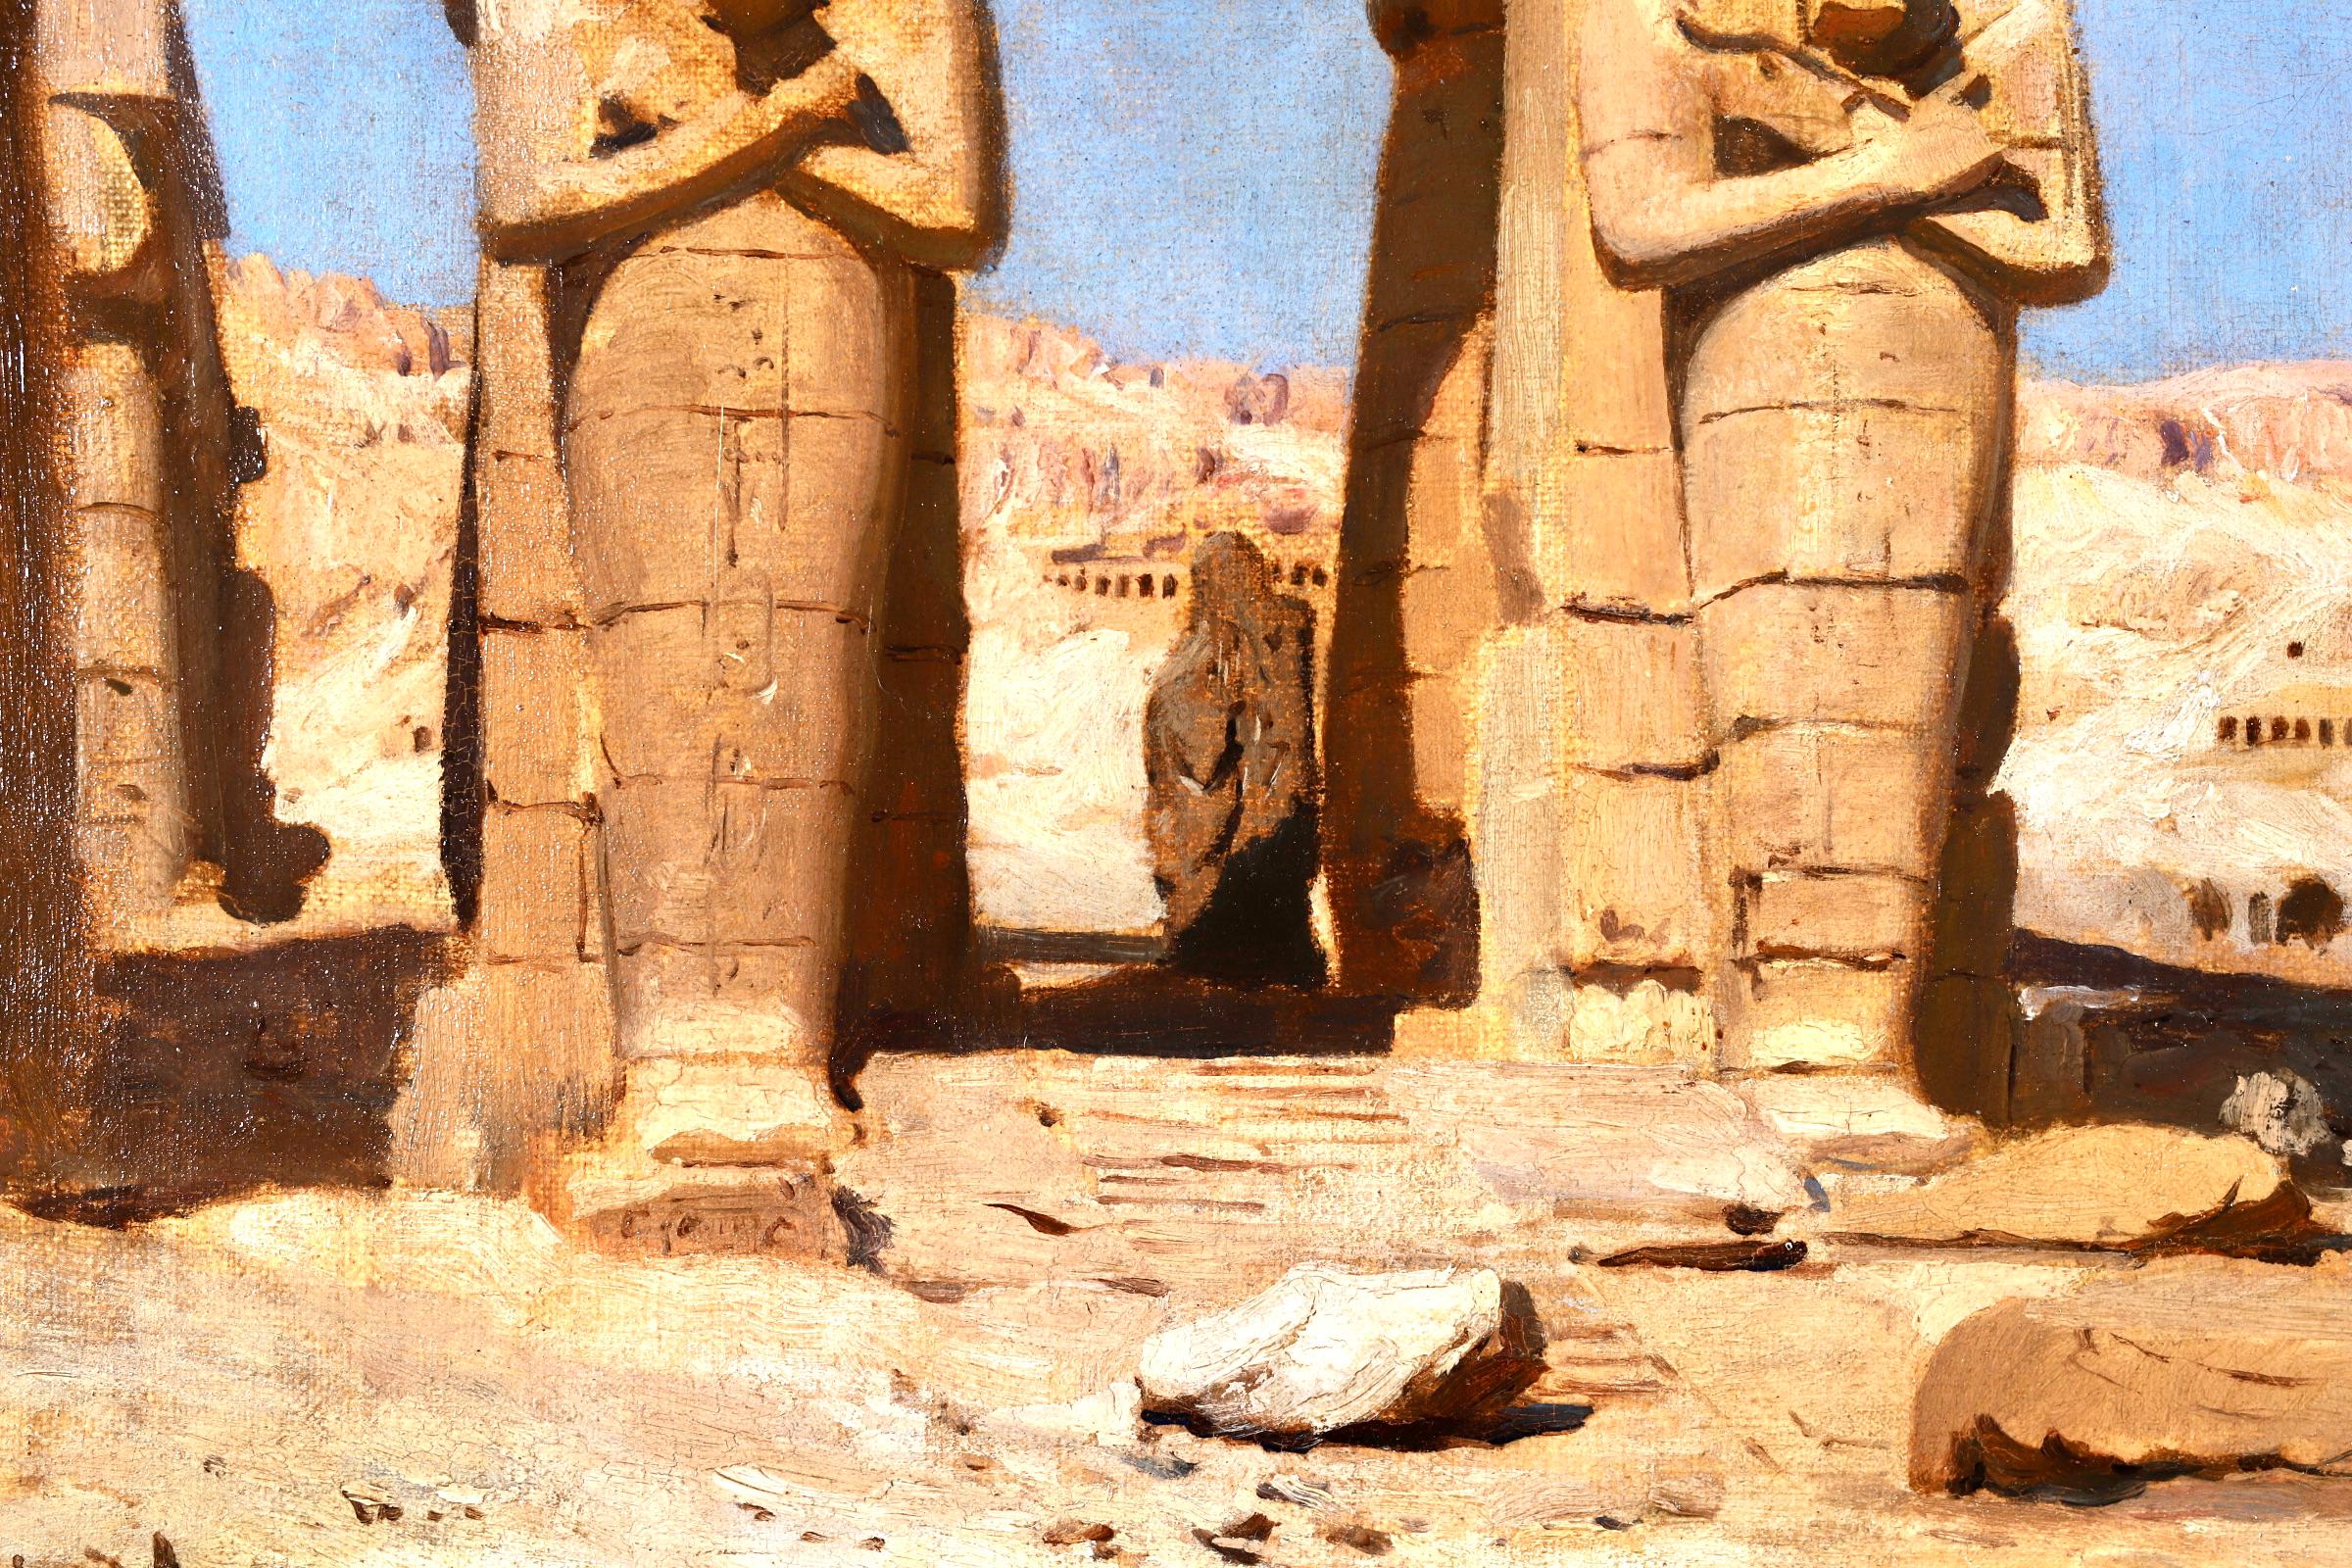 A wonderful oil on canvas by American orientalist painter Frederick Arthur Bridgman depicting The Colossi of Memnon - two large stone statues of Pharaoh Amenhotep III, who reigned in Egypt during the Eighteenth Dynasty of Egypt. The statues are